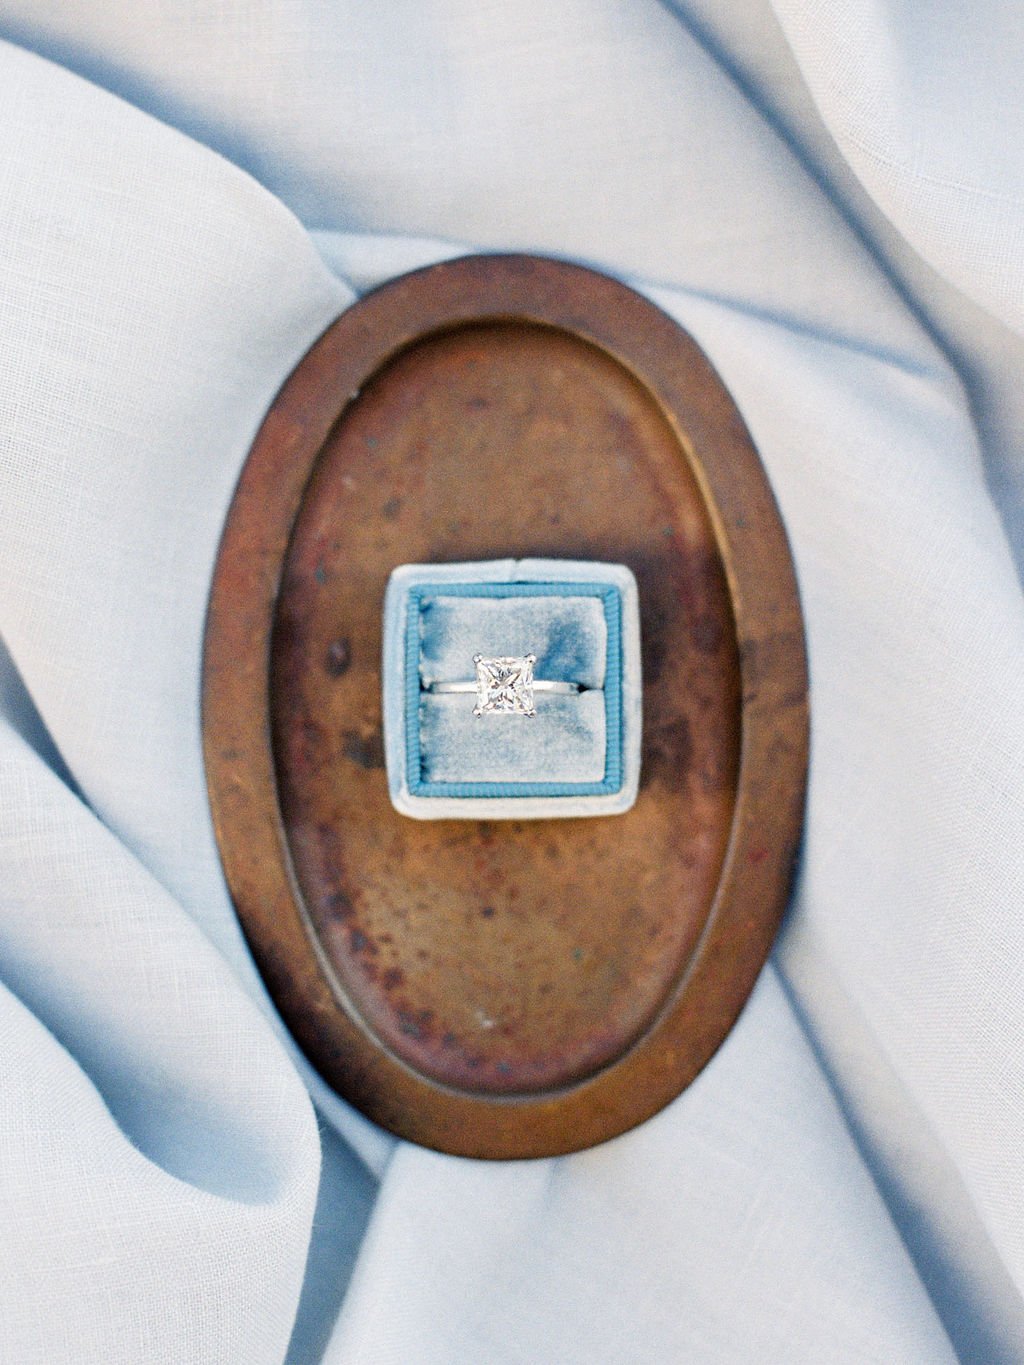 A square diamond wedding ring in it's blue box captured from above on a brown oval plate